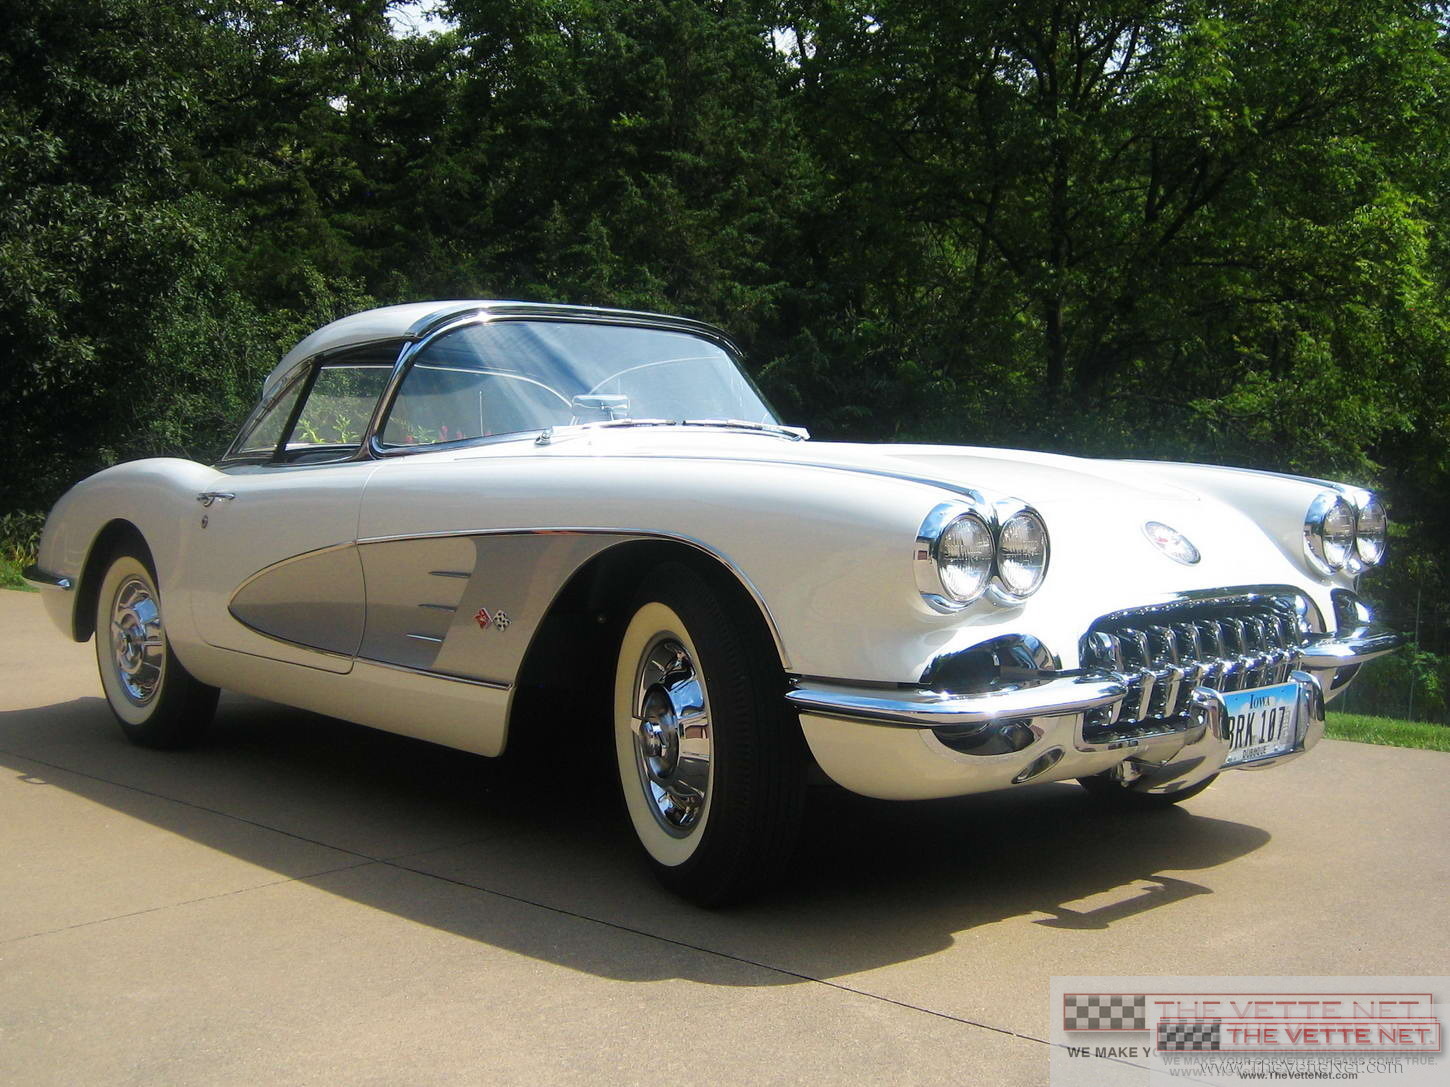 1958 Corvette Convertible White with Silver coves